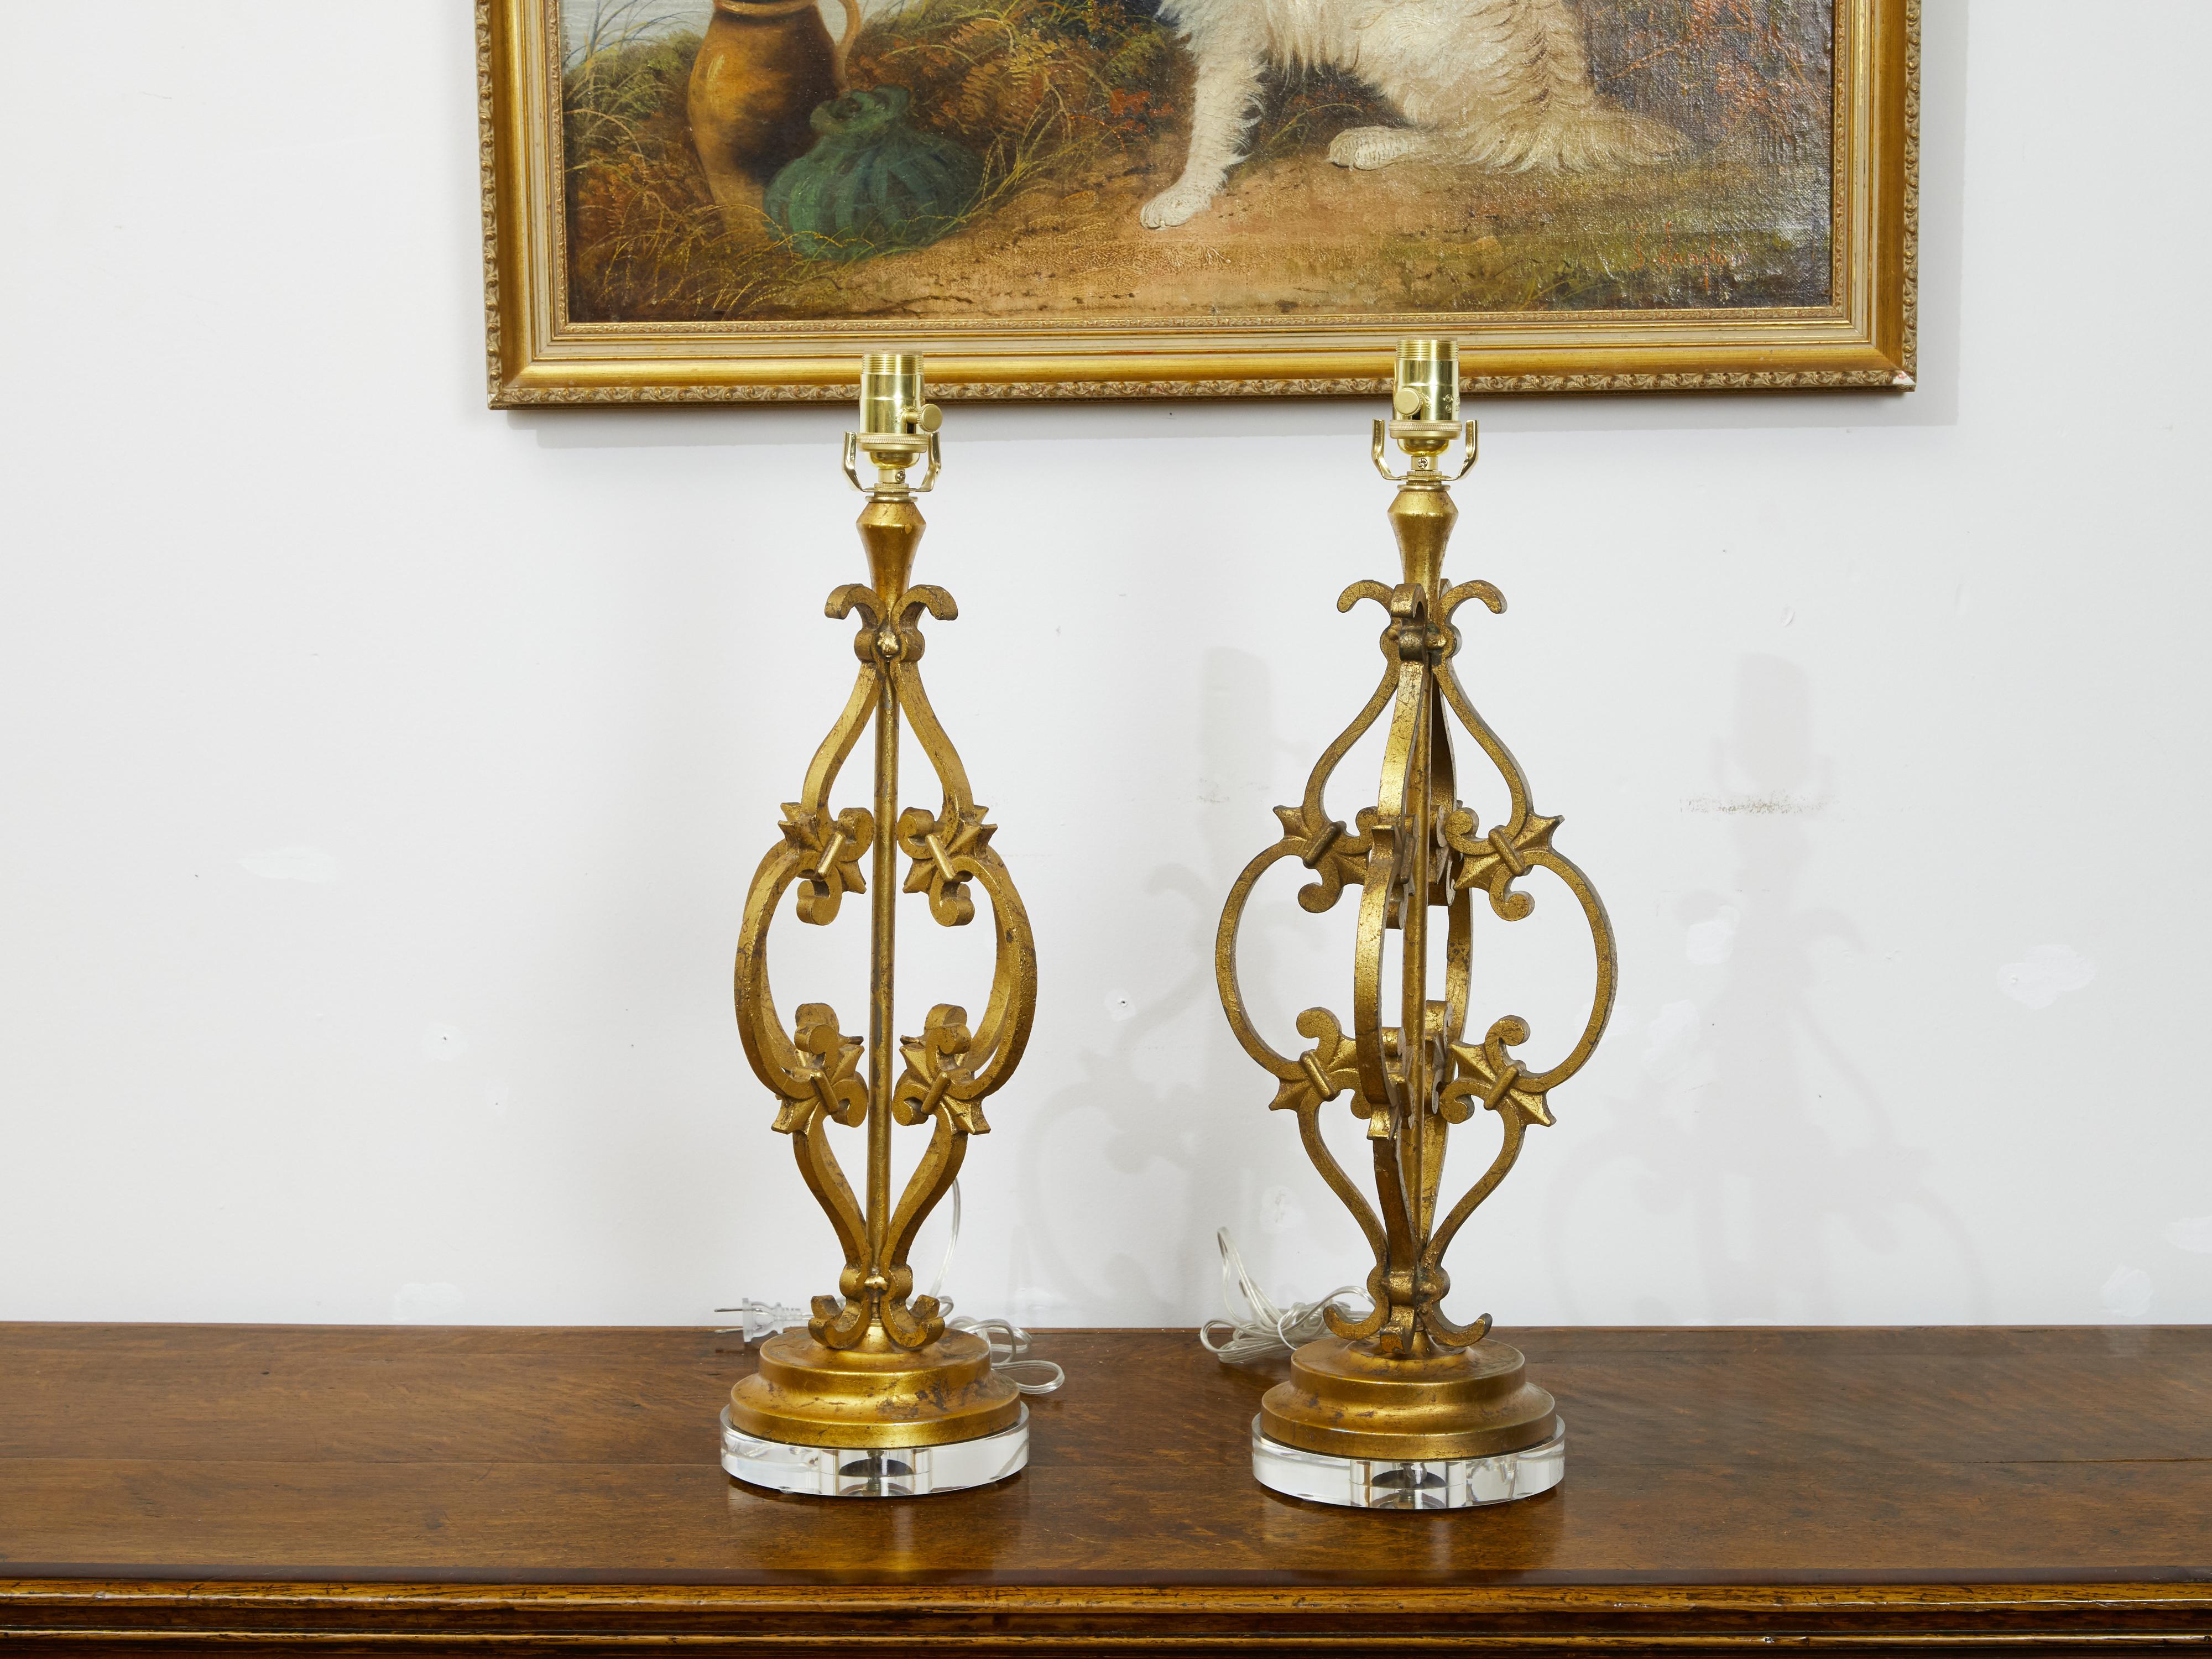 A pair of French gilt metal table lamps from the mid 20th century, with scrolling effects, fleurs de lys and lucite bases. Created in France during the midcentury period, each of this pair of table lamps features a delicate arrangement of S and C